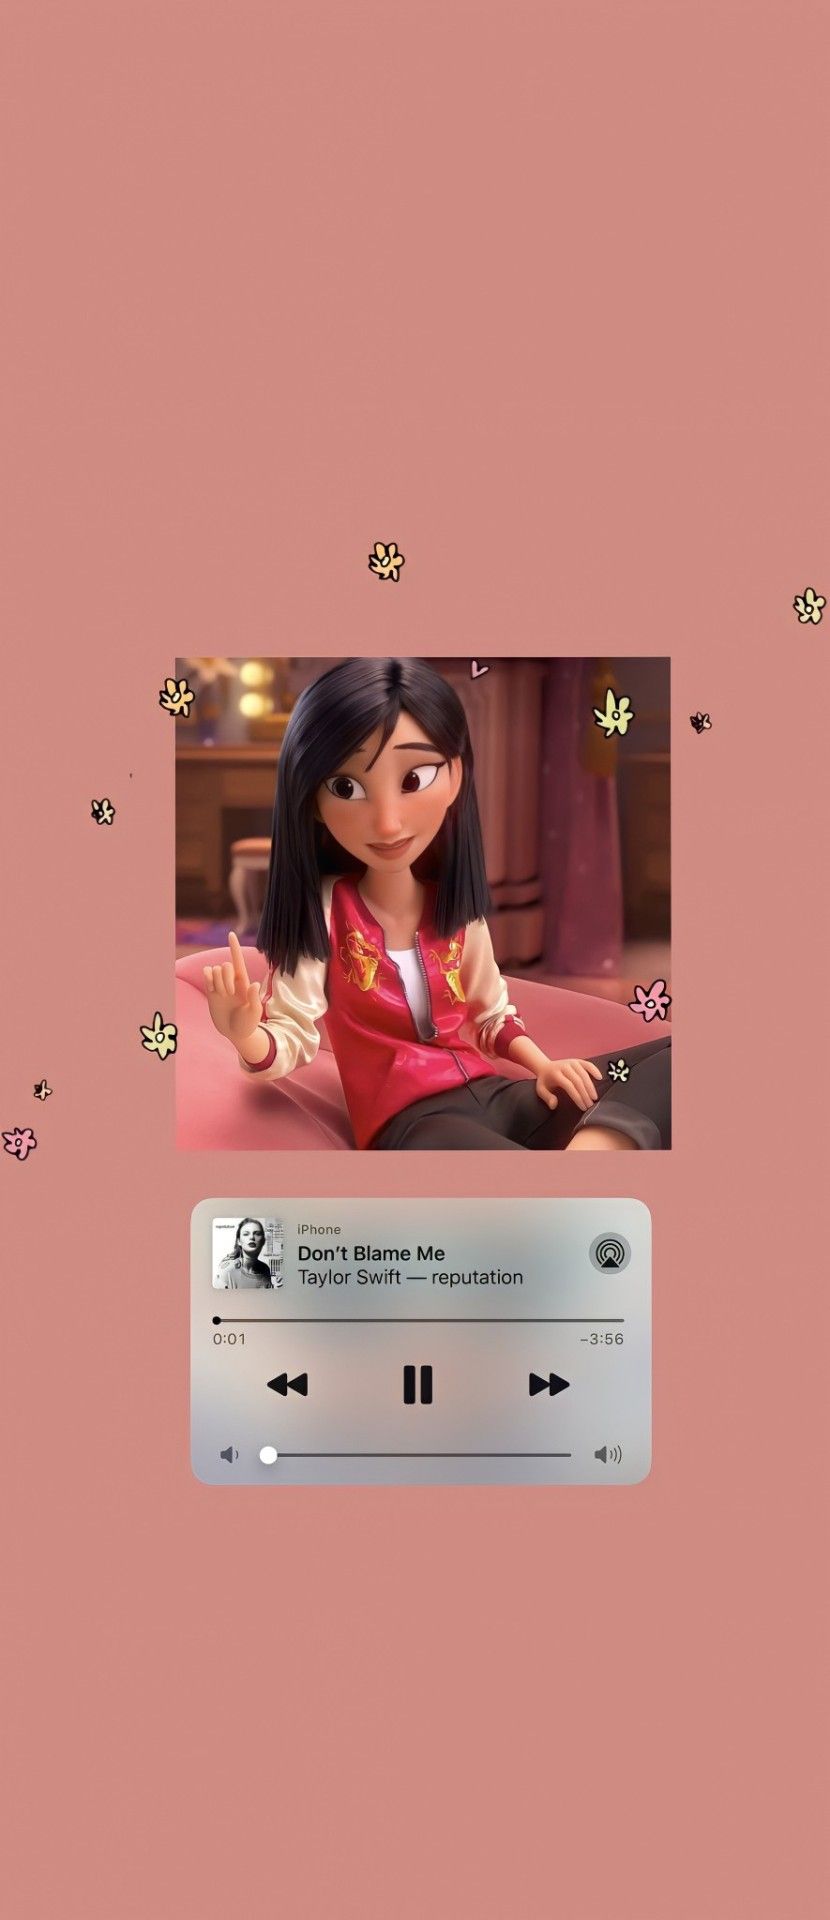 A picture of an animated character on the screen - Mulan, Disney